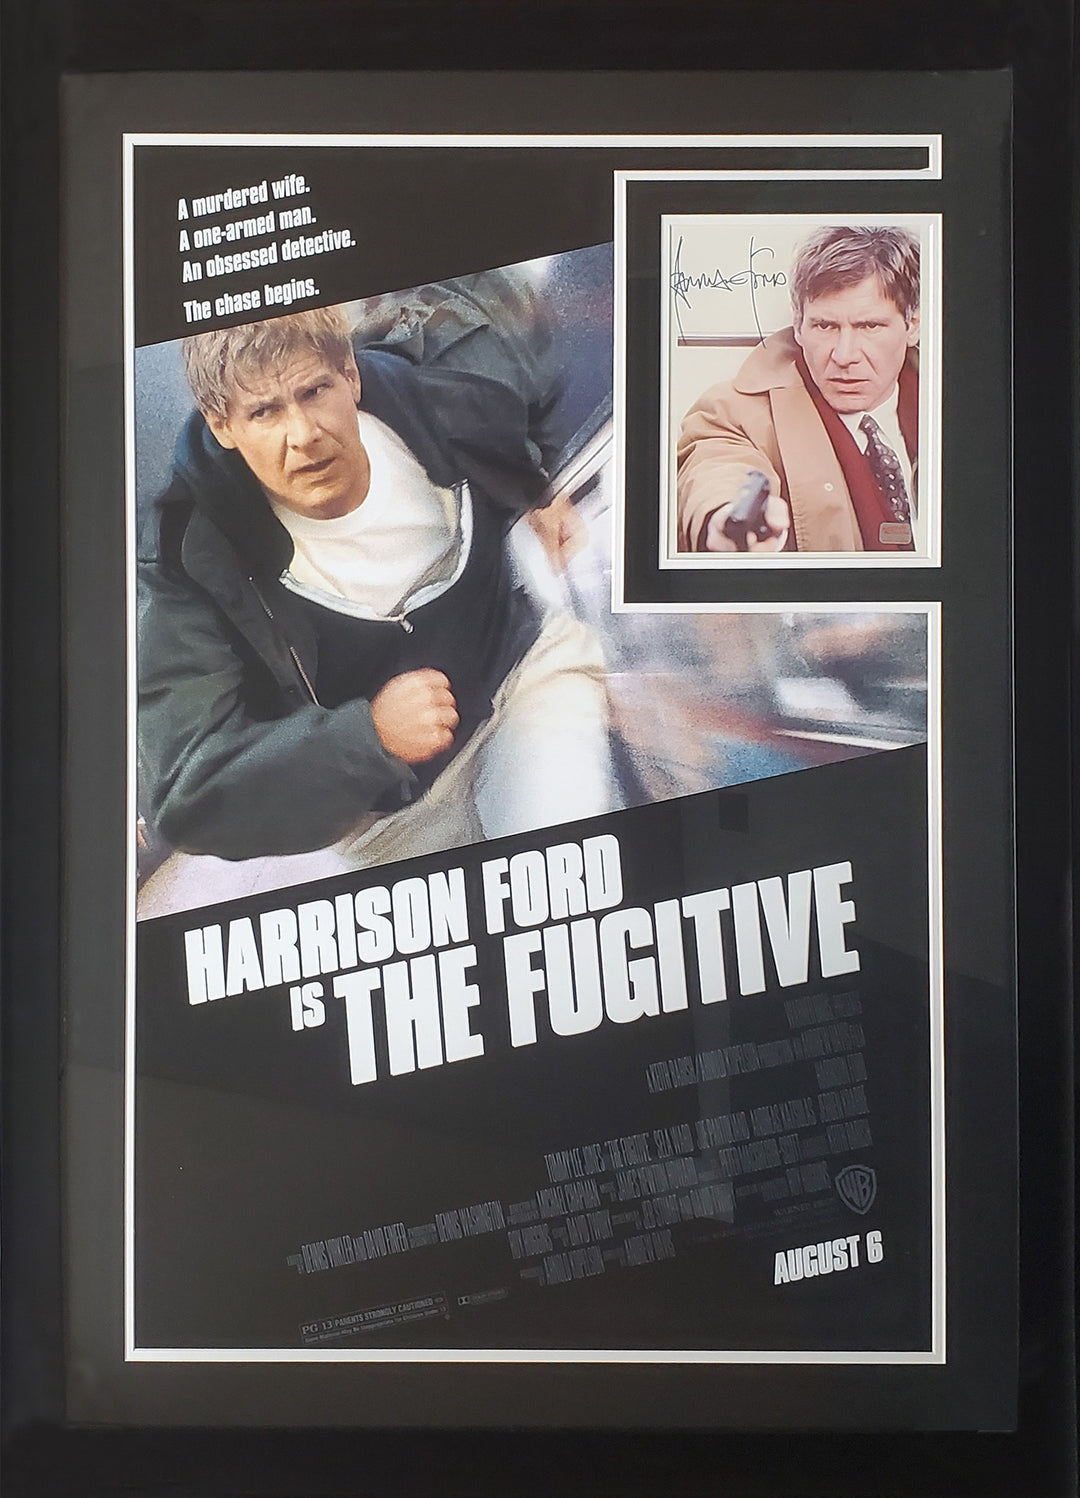 Harrison Ford Signed 8X10 Framed With The Fugitive Poster, The Fugitive, Hollywood, Movies, Autographed, Signed, AAOCM30393